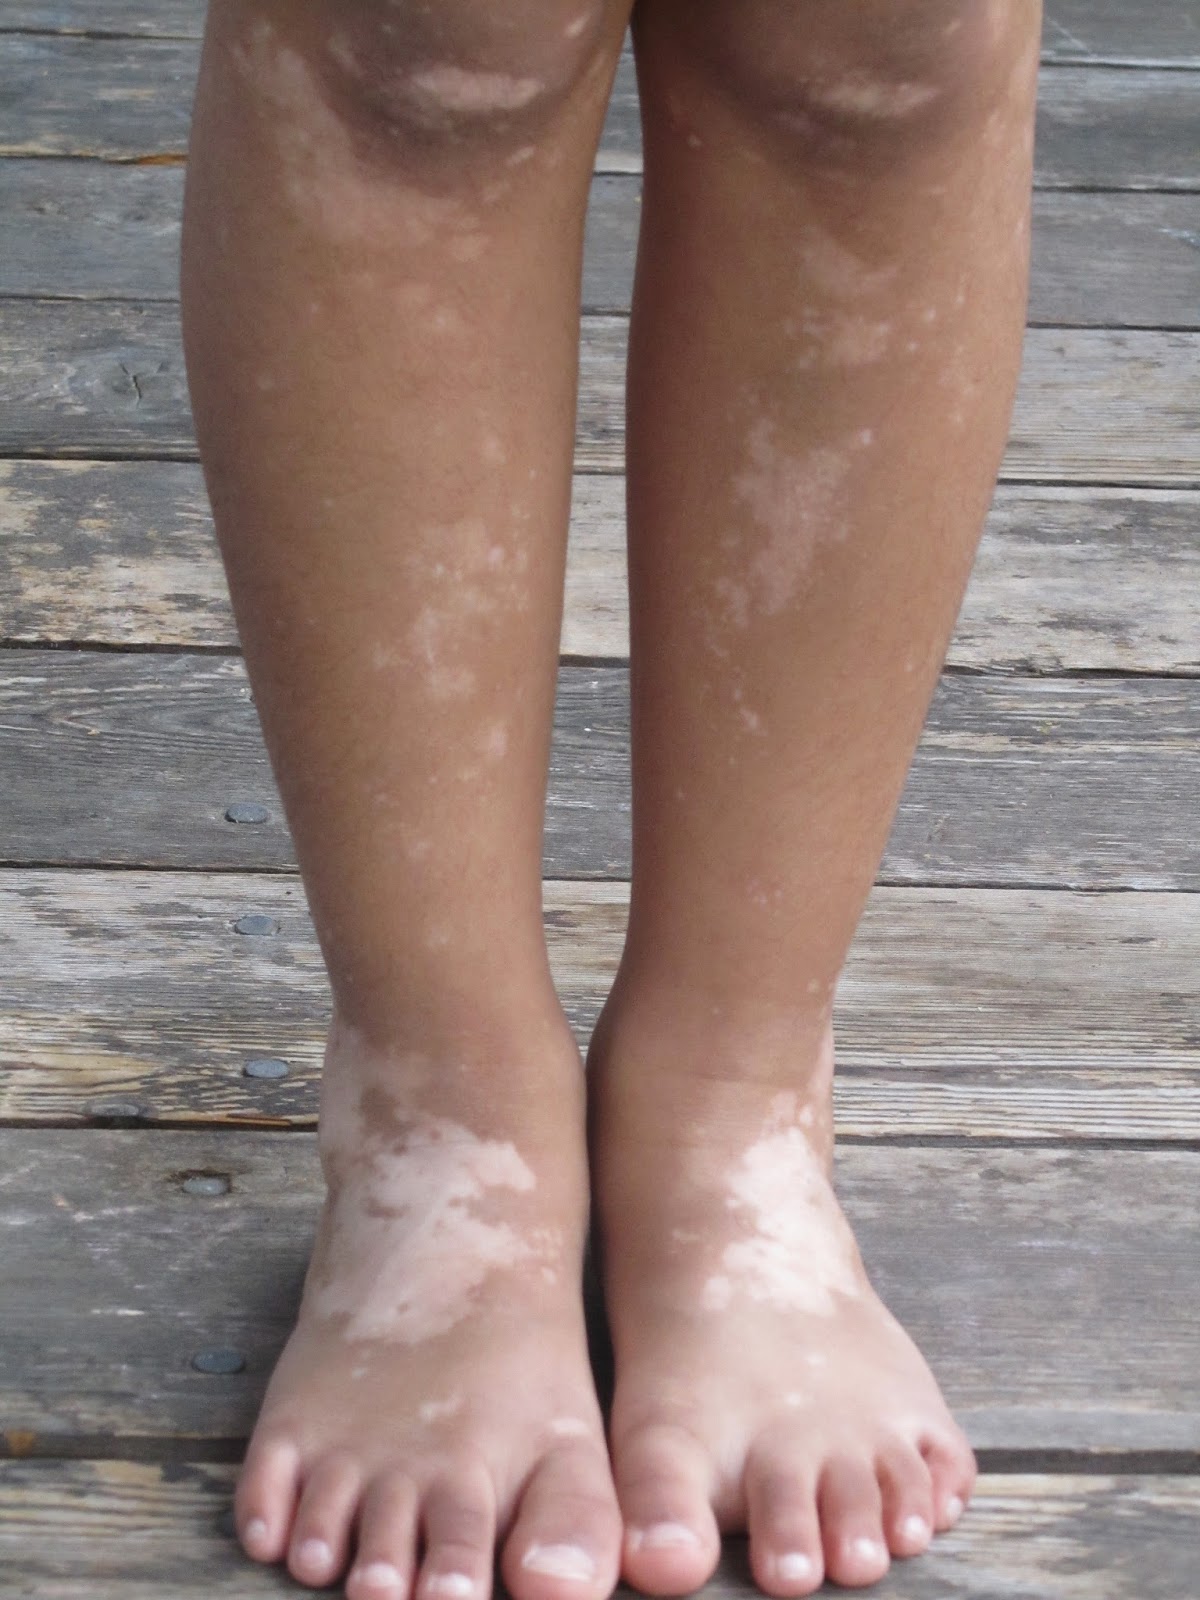   Leucoderma - Vitiligo   What is Leucoderma - Vitiligo? Lecucoderma, also known as vitiligo, is a distressing skin condition. The word Lecucoderma means ‘white skin’. There is a gradual loss of pigment melanin from the skin layers which results in white patches. These patches look ugly, especially in persons with dark complexions. Lecucoderma can occur at any age in either sex in normal skin.   Leucoderma Disease  Lecucoderma does not cause any organic harm. It , however, brings about great psychological tension to the patient who is more embarassed than the victim of any pain or discomfort. Lecucoderma disease thus, besides being a medical problem, also becomes a social stigma. Leucoderma is a fairly common disorder and it affects one per cent or more of the world’s population. The incidence is a little higher in India. Lecucoderma is, however, more common in women than men. The most affected areas are the hands, the neck, the back and the wrist in that order.  Symptom of Leucoderma (Vitiligo) Lecucoderma usually starts with a small white spot and later on it develops into patches. These patches are pale in the beginning but become whiter and whiter as time passes due to loss of pigment. As spots enlarge, they merge into each other and, in course of time, form a very broad patch. In some cases, most of the skin of the body may be covered with white patches in Lecucoderma.  Causes of Leucoderma (Vitiligo) Many wrong beliefs are prevalent about the causes of leucoderma. It is not caused by eating fish and drinking milk at the same time, as is generally believed because even vegetarians suffer from this disorder. Other food combinations such as pumpkin and milk, onion and milk as possible causes of leucoderma also have no basis. Leucoderma is not caused by any germs ; nor is it due bad blood. It is neither infectious nor contagious. It cannot be transmitted from one person to another by physical contact.  The main causes of Leucoderma (Vitiligo) are  • Excessive mental worry,  • Chronic or acute gastric disorder,  • Impaired hepatic function such as jaundice,  • Worms or other parasites in the alimentary canal, • Ailments like typhoid which affect the gastrointestinal tract,  • Defective preparative mechanism and burn injuries.  Often the hormone secreting glands are involved in Leucoderma. Heredity is also a causative factor and about 30 per cent of patients have a family history of the disorder.   Prevention tips for Leucoderma (Vitiligo) Cure  1. The patient should avoid tea, coffee, alcoholic beverages and all condiments and highly flavoured dishes.  2. Also avoid sugar, white flour products, denatured cereals like polished rice and pearled barley and tinned or bottled foods.  Treatment of Leucoderma (Vitiligo) The treatment of Leucoderma consists of adoption of constitutional measures to cleanse the system of accumulated toxins. This enables the healing power within the body to assert itself, and produce normalcy.  In Homeopathy system, Symptomatic Homeopathy works well for Leucoderma - Vitiligo, It helps to prevent further recurrence also. So its good to consult a experienced Homeopathy physician without any hesitation.     Whom to contact for Leucoderma - Vitiligo Treatment  Dr.Senthil Kumar Treats many cases of Leucoderma – Vitiligo. In his medical professional experience with successful results. Many patients get relief after taking treatment from Dr.Senthil Kumar.  Dr.Senthil Kumar visits Chennai at Vivekanantha Homeopathy Clinic, Velachery, Chennai 42. To get appointment please call 9786901830, +91 94430 54168 or mail to consult.ur.dr@gmail.com,    For more details & Consultation Feel free to contact us. Vivekanantha Clinic Consultation Champers at Chennai:- 9786901830  Panruti:- 9443054168  Pondicherry:- 9865212055 (Camp) Mail : consult.ur.dr@gmail.com, homoeokumar@gmail.com   For appointment please Call us or Mail Us  For appointment: SMS your Name -Age – Mobile Number - Problem in Single word - date and day - Place of appointment (Eg: Rajini – 30 - 99xxxxxxx0 – Leucoderma – Vitiligo, Ven pulligal – 21st Oct, Sunday - Chennai ), You will receive Appointment details through SMS